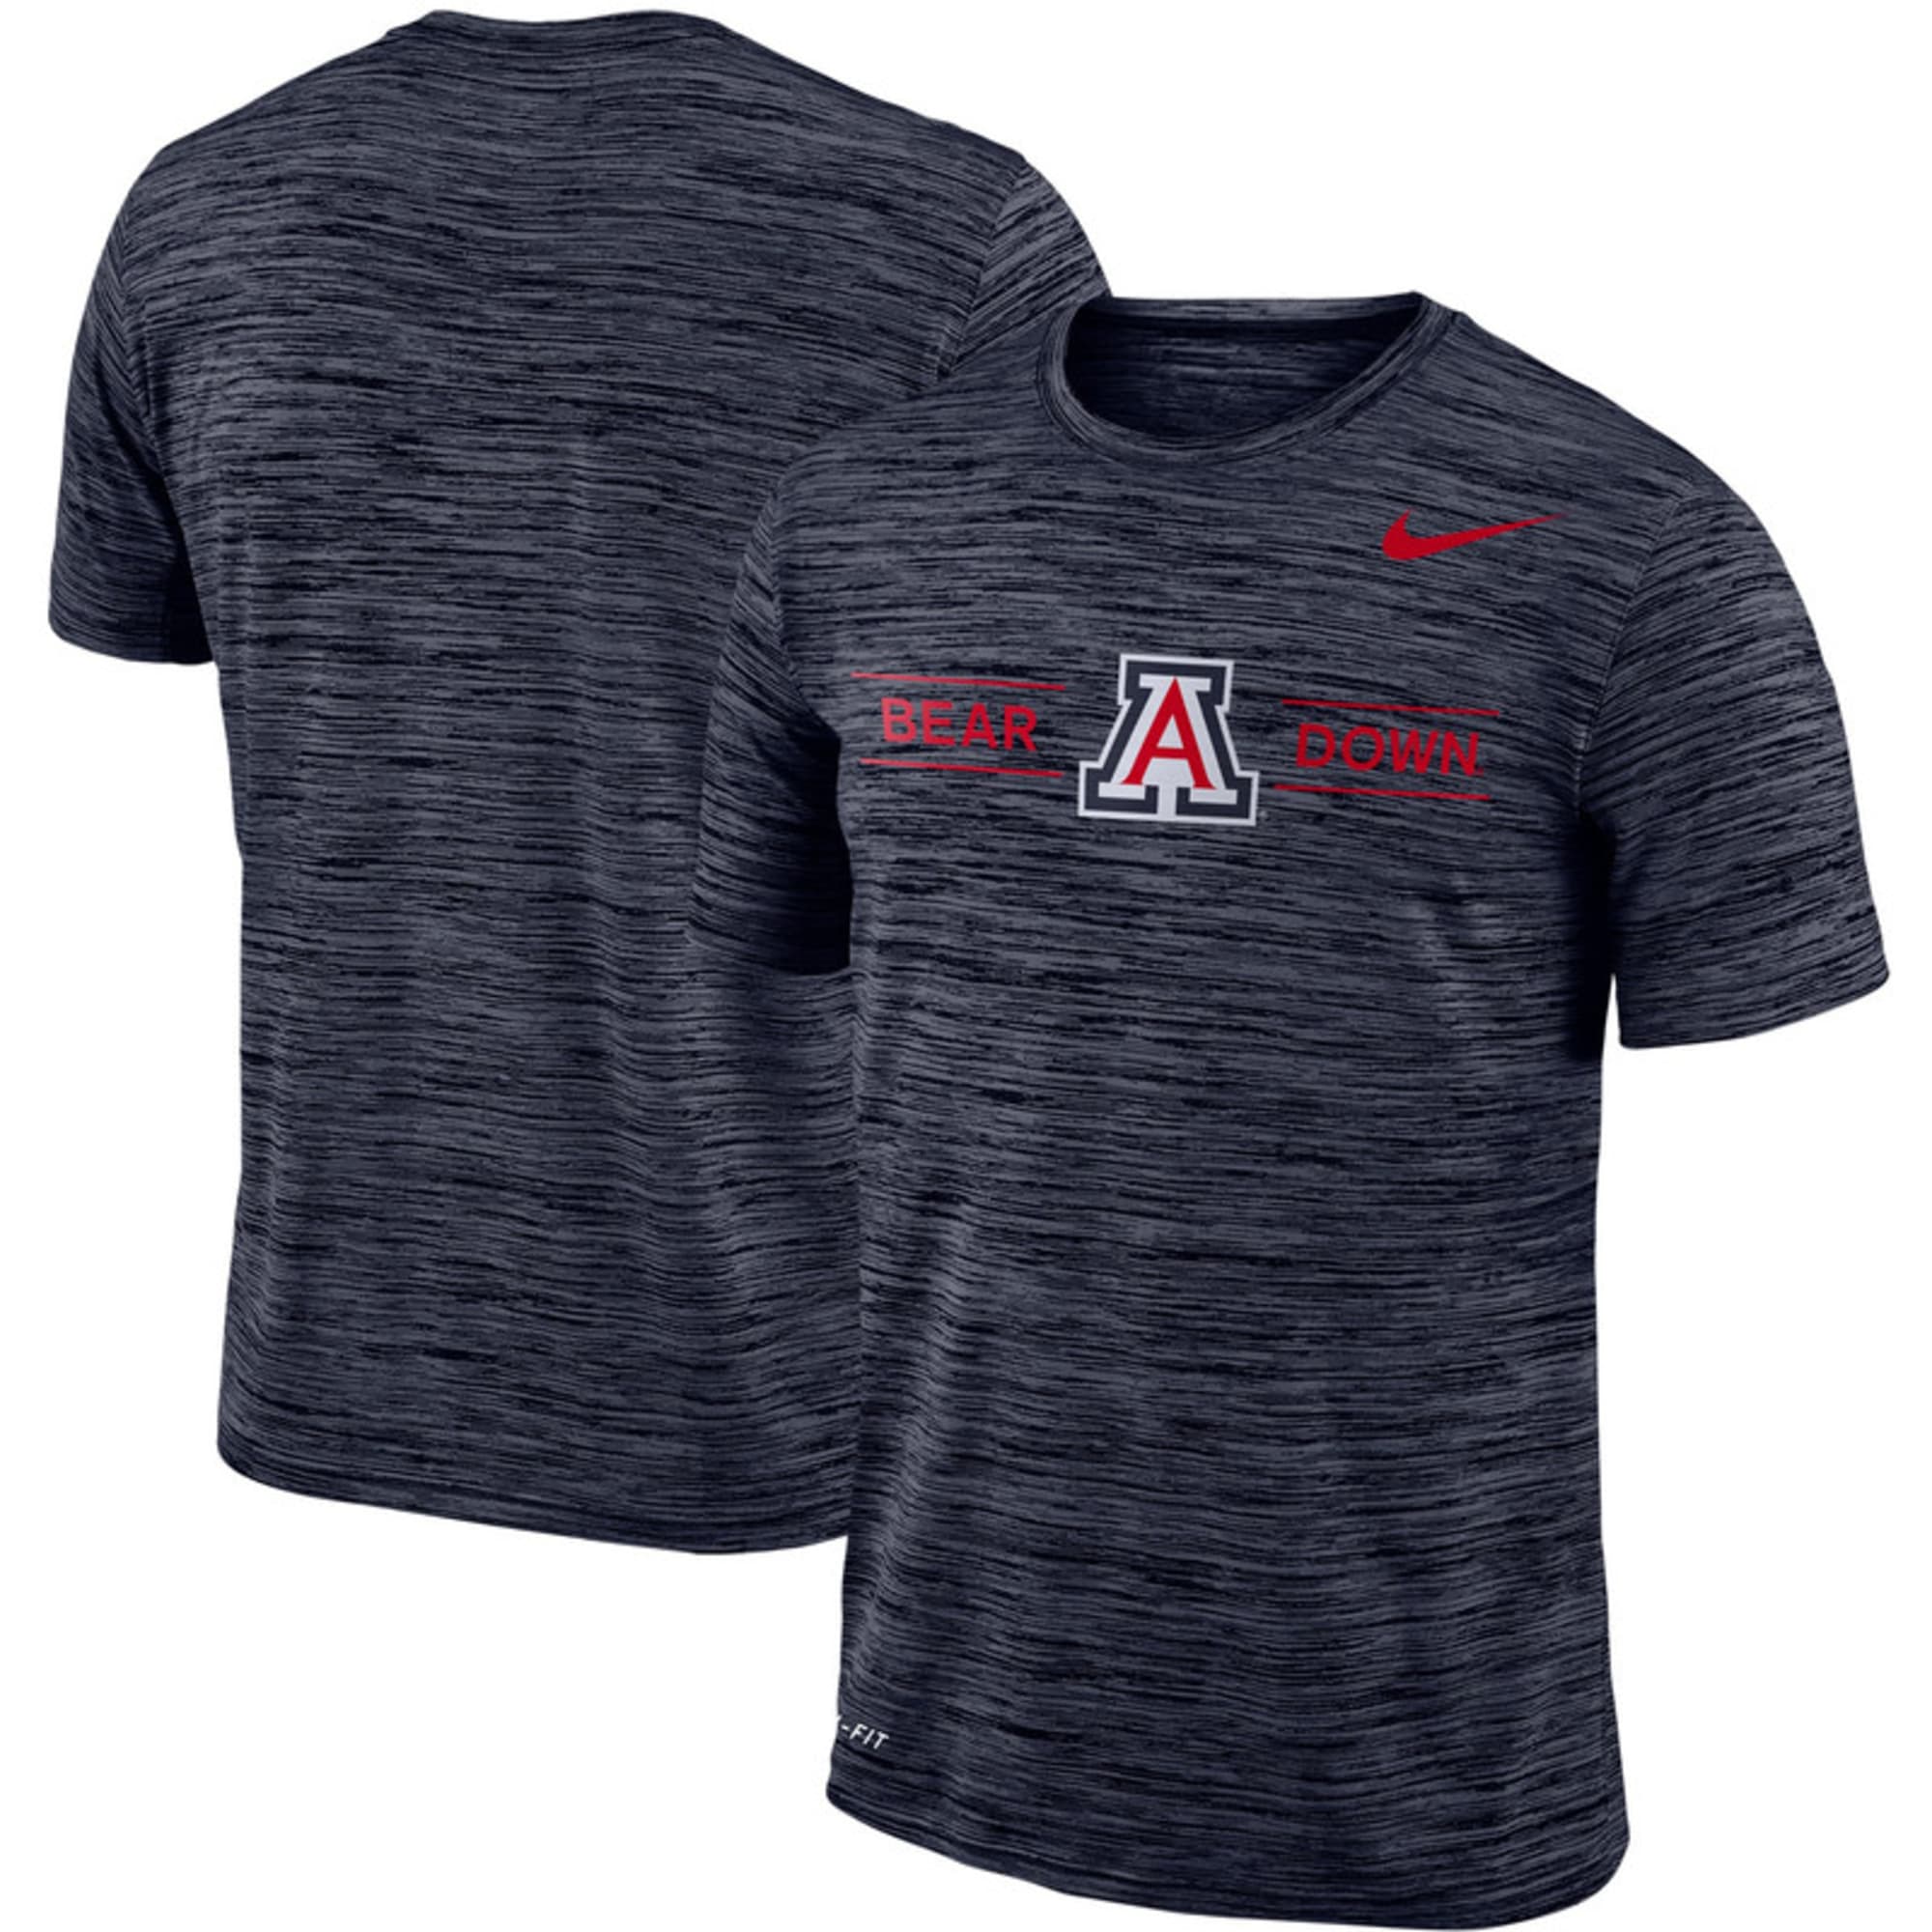 The perfect holiday gifts for the Arizona Wildcats fan